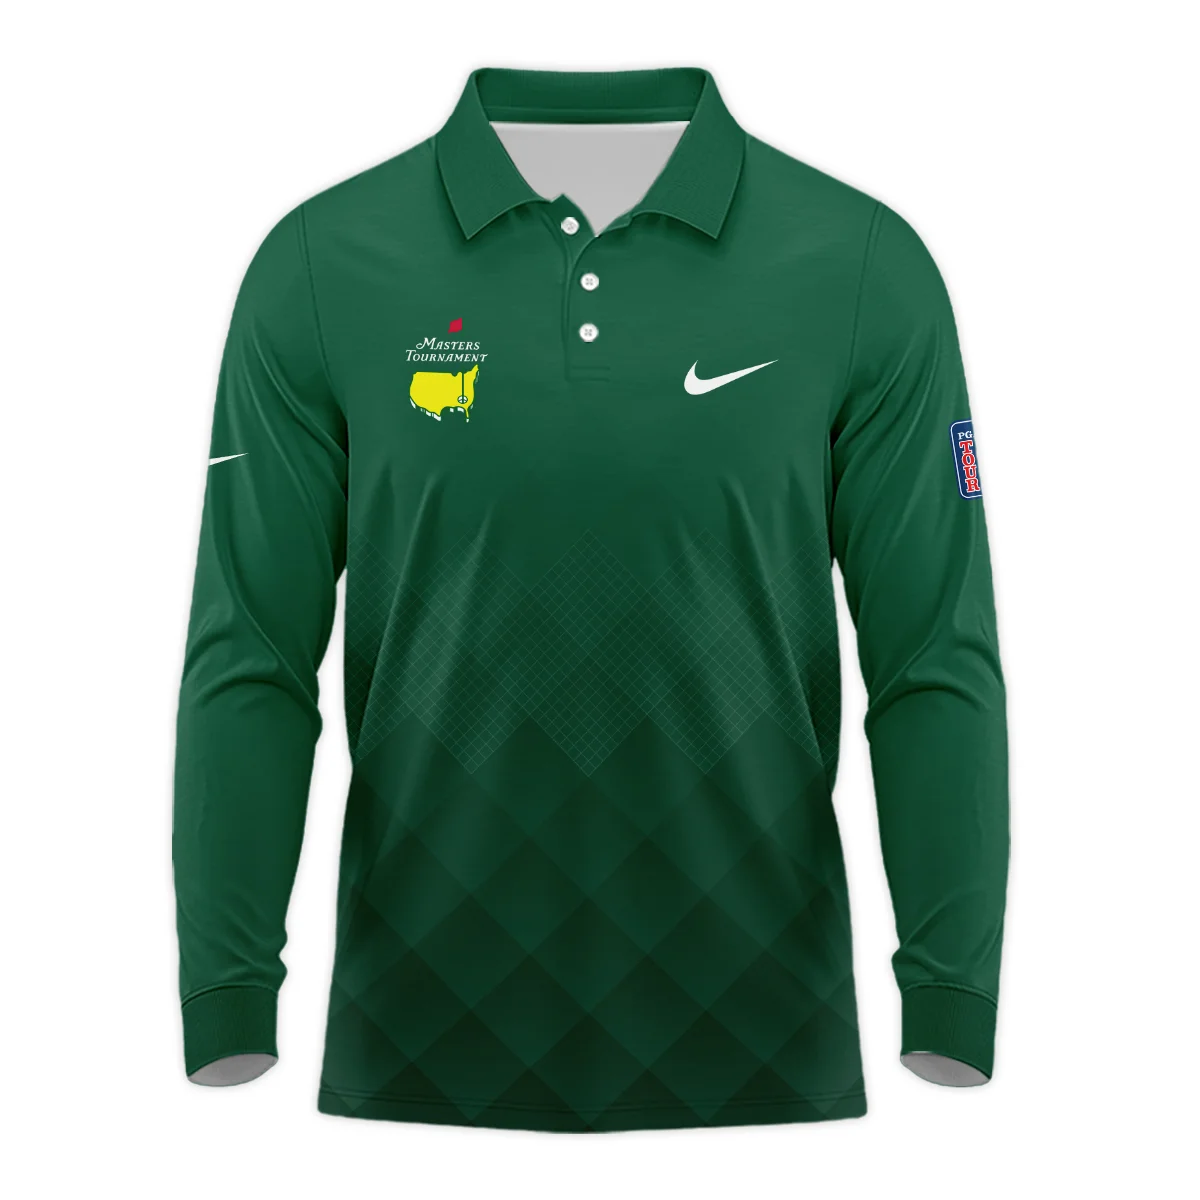 Masters Tournament Nike Gradient Dark Green Pattern Polo Shirt Style Classic Polo Shirt For Men